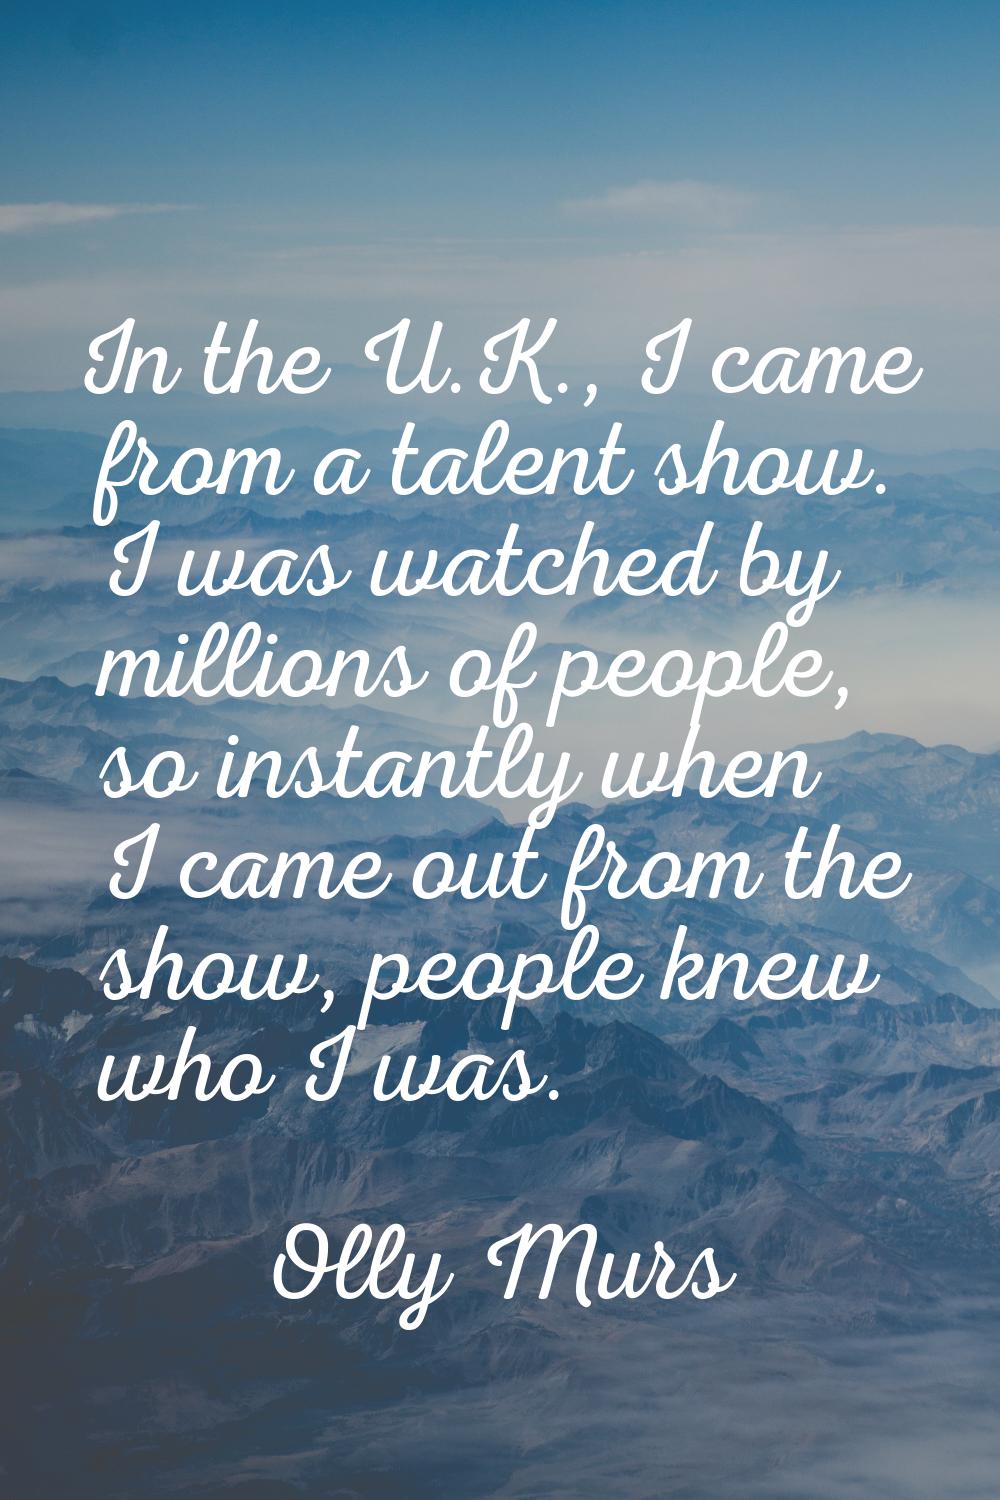 In the U.K., I came from a talent show. I was watched by millions of people, so instantly when I ca